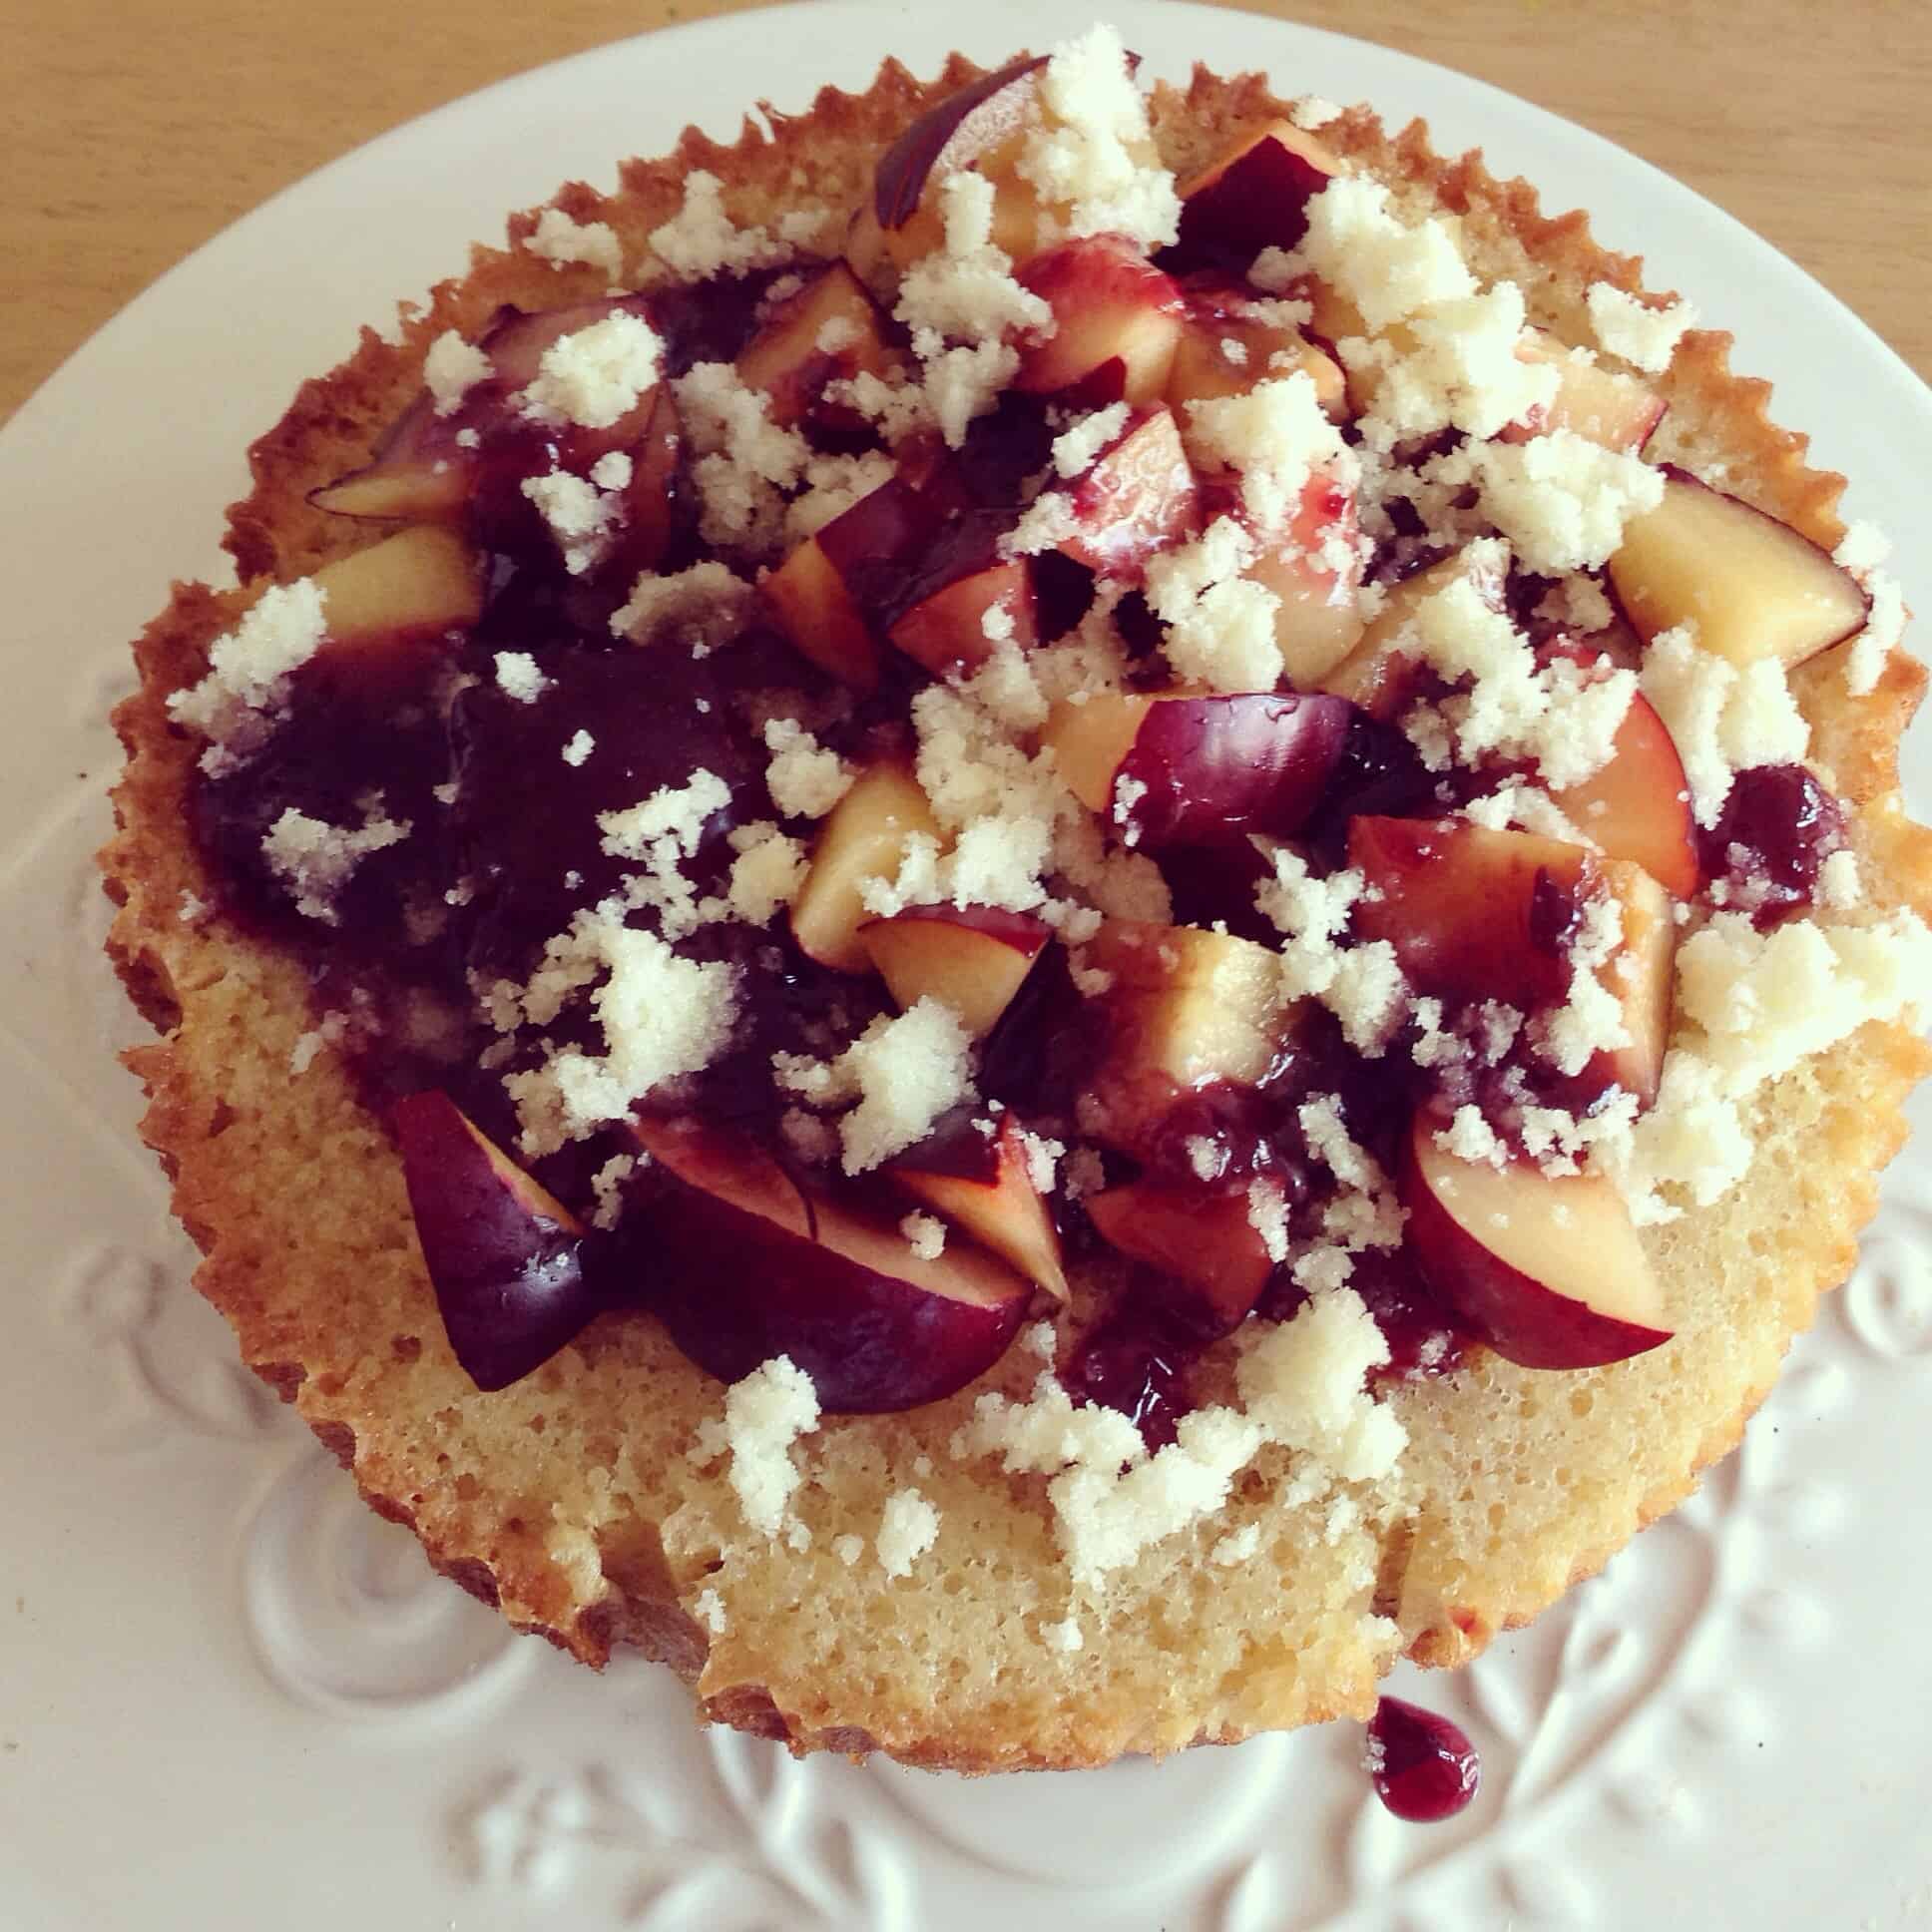 Slow Cooker Plum and Almond Cake